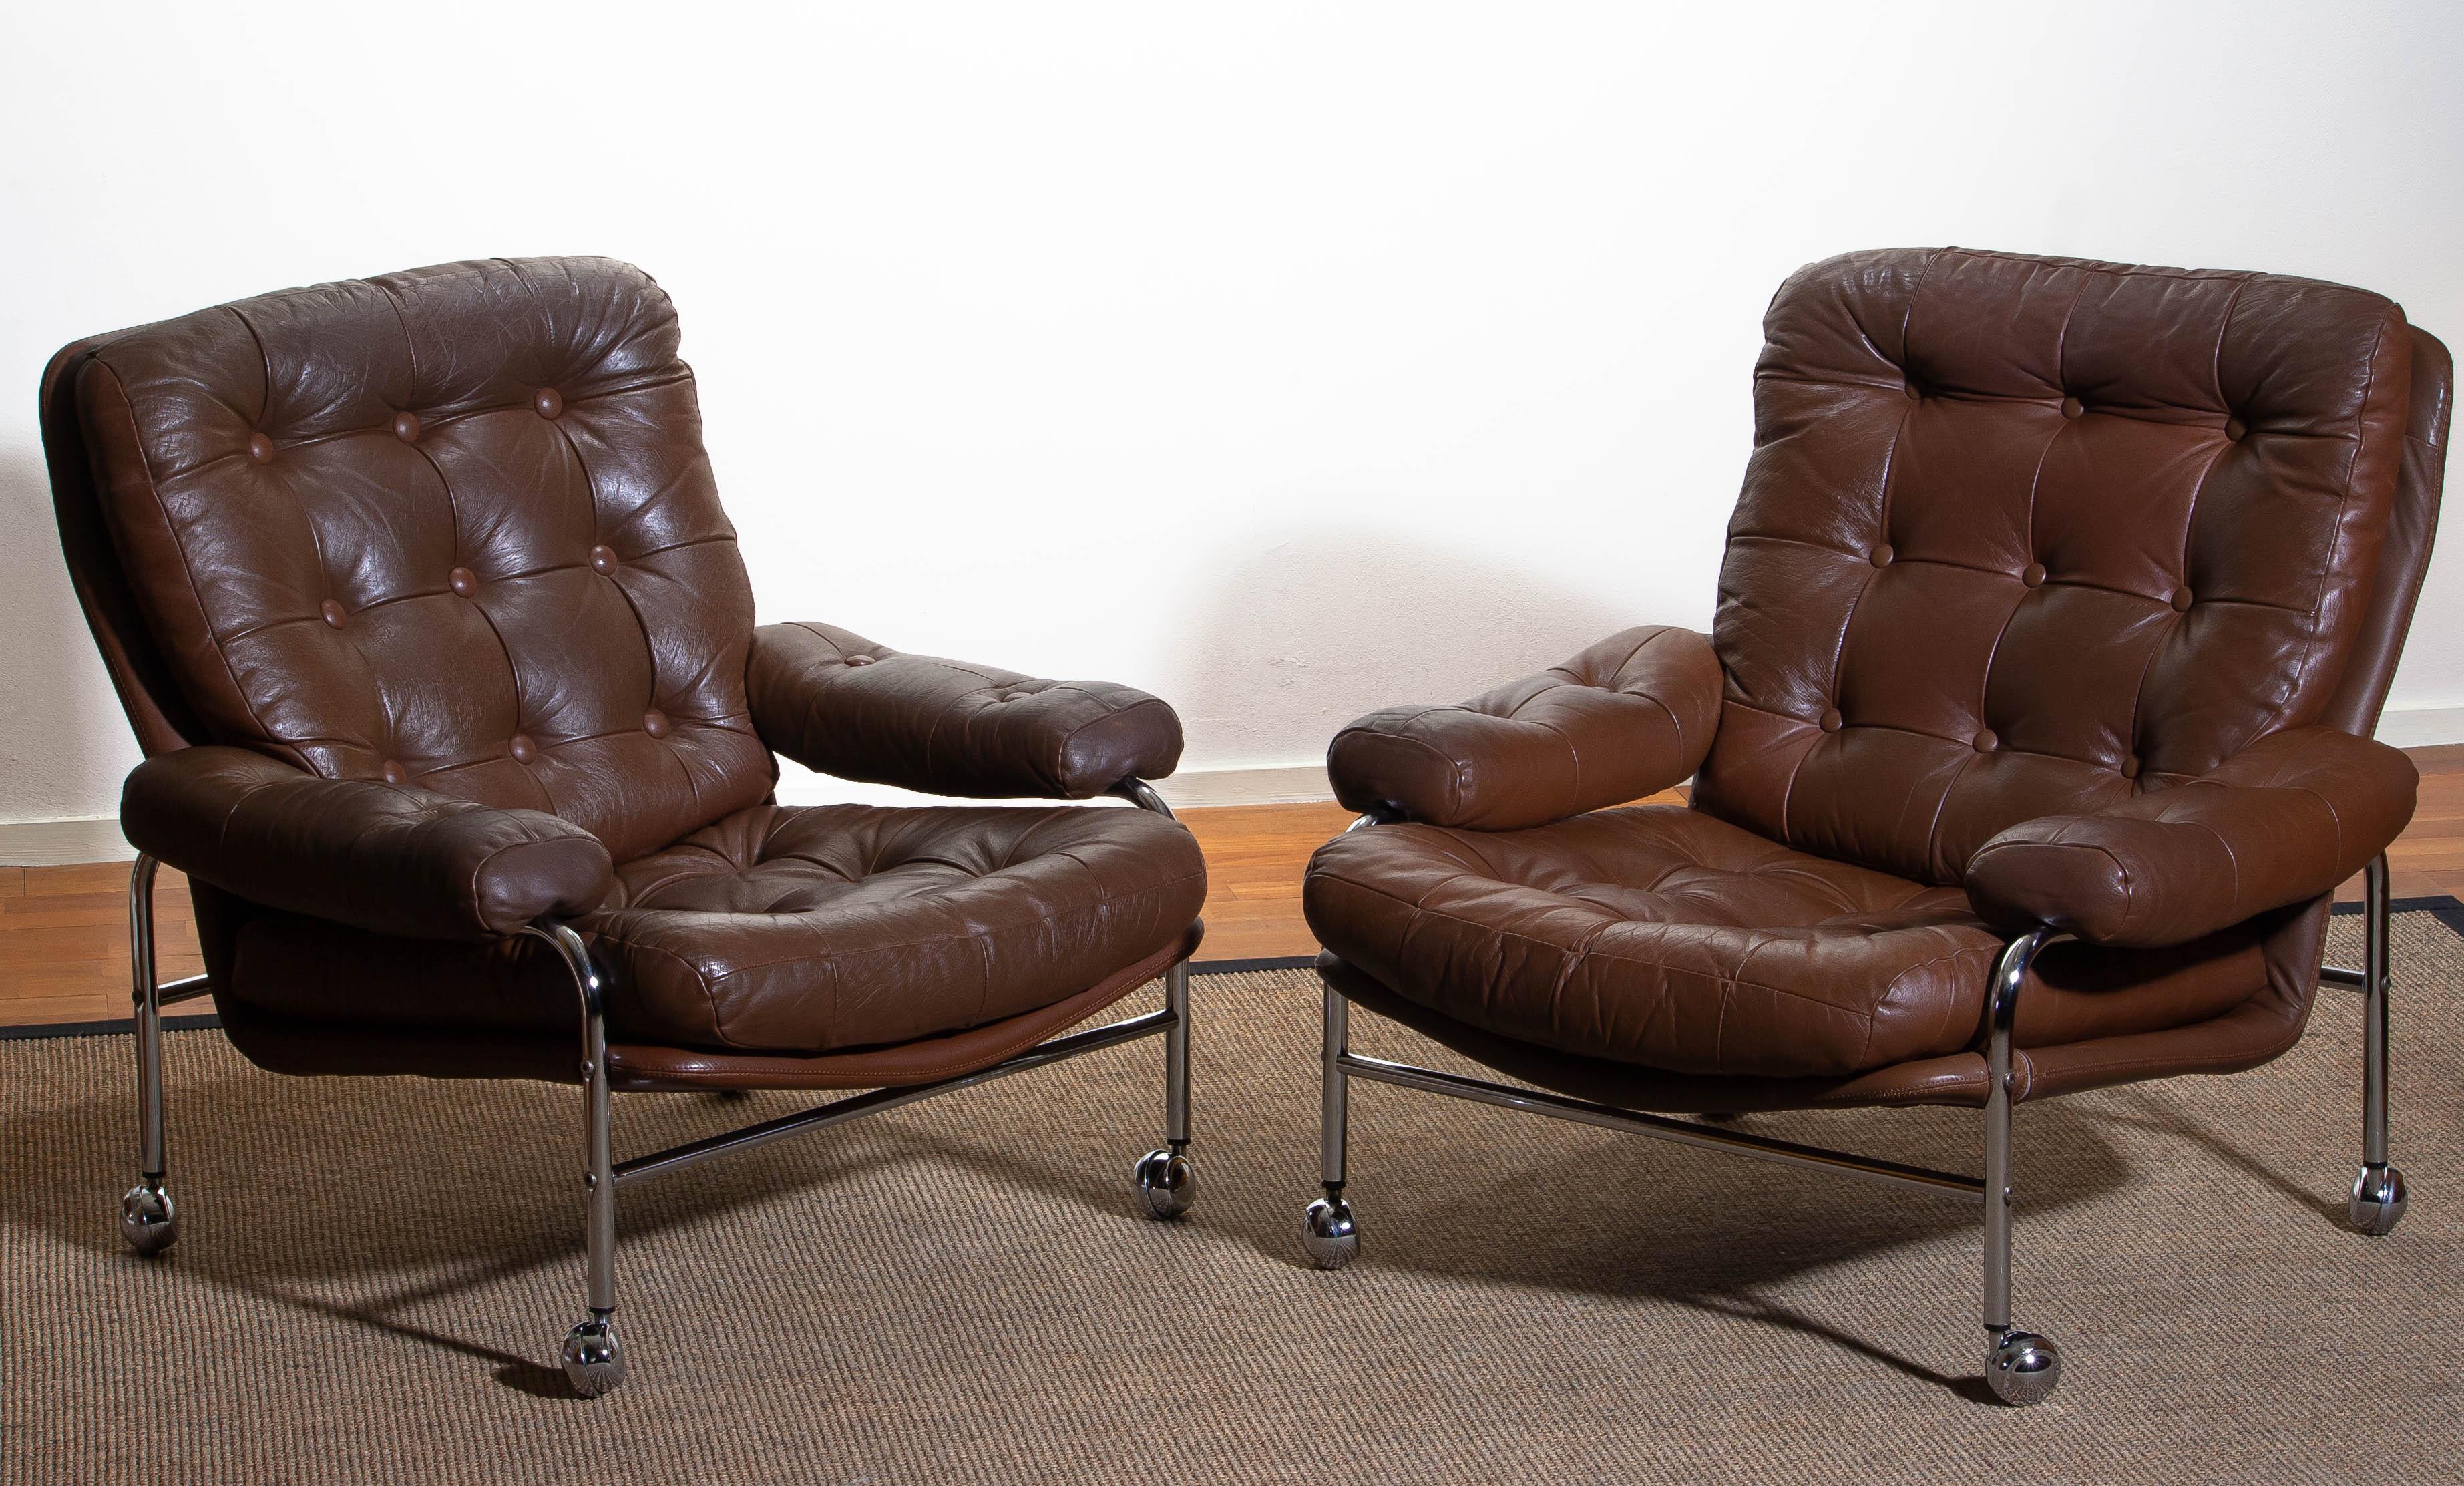 1970s, Chrome and Brown Leather Easy / Lounge Chairs by Scapa Rydaholm, Sweden (Leder)